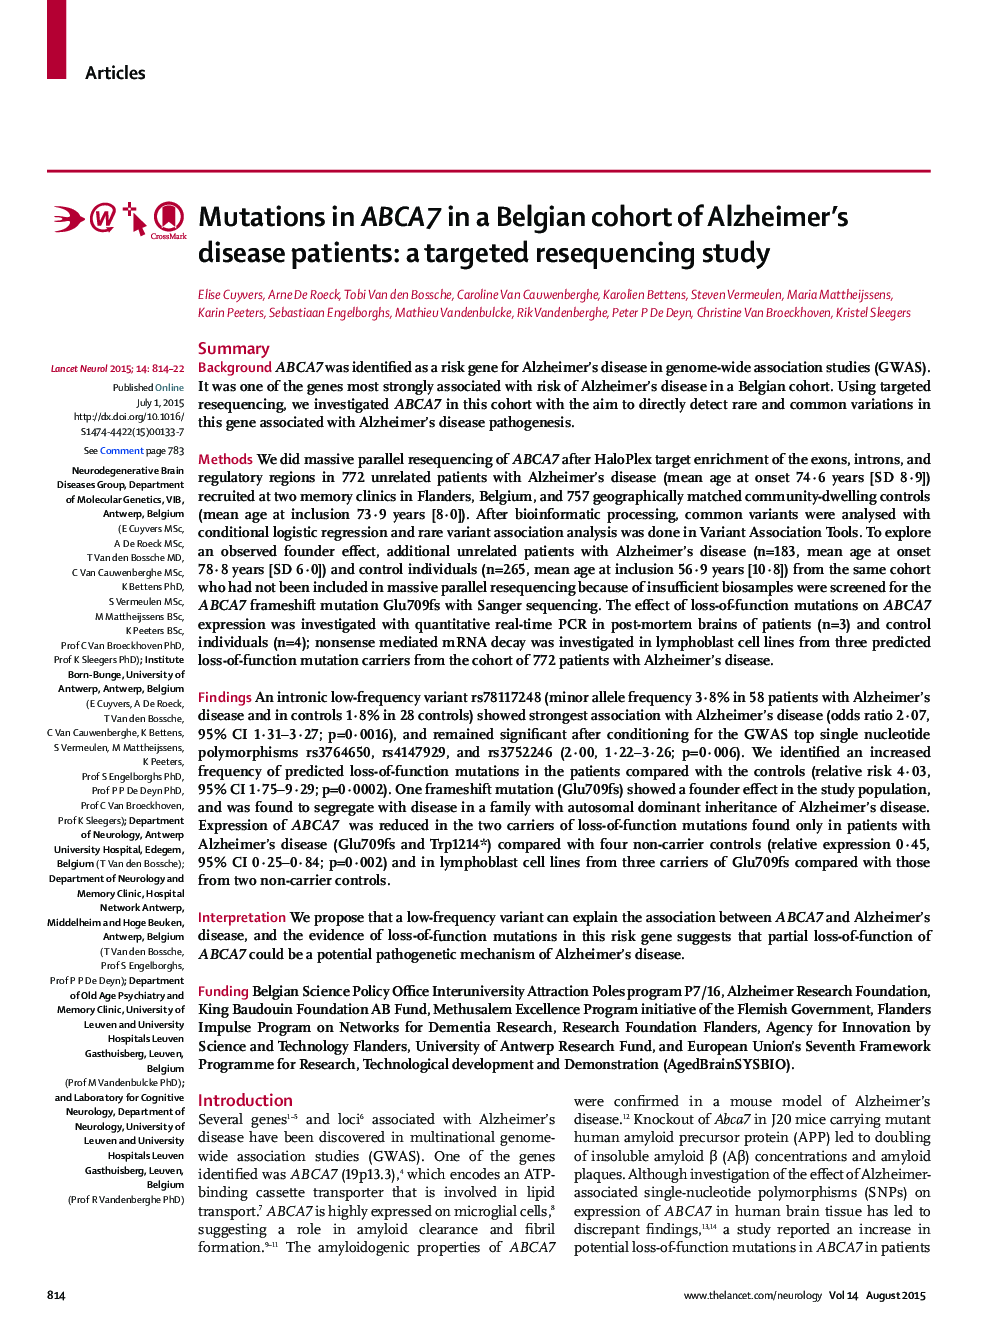 Mutations in ABCA7 in a Belgian cohort of Alzheimer's disease patients: a targeted resequencing study